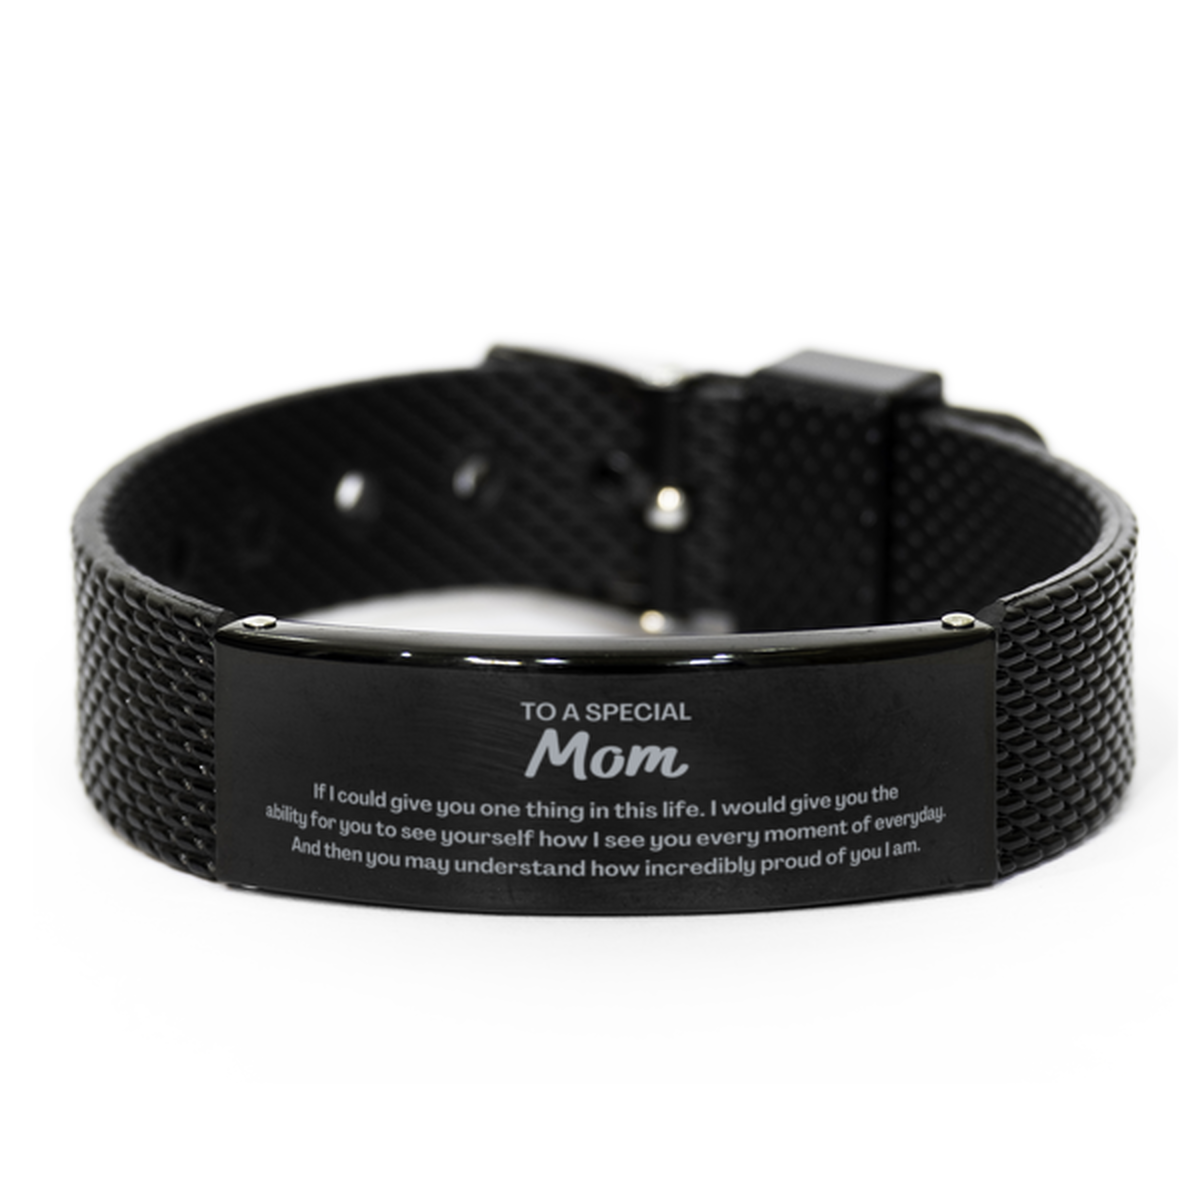 To My Mom Black Shark Mesh Bracelet, Gifts For Mom Engraved, Inspirational Gifts for Christmas Birthday, Epic Gifts for Mom To A Special Mom how incredibly proud of you I am